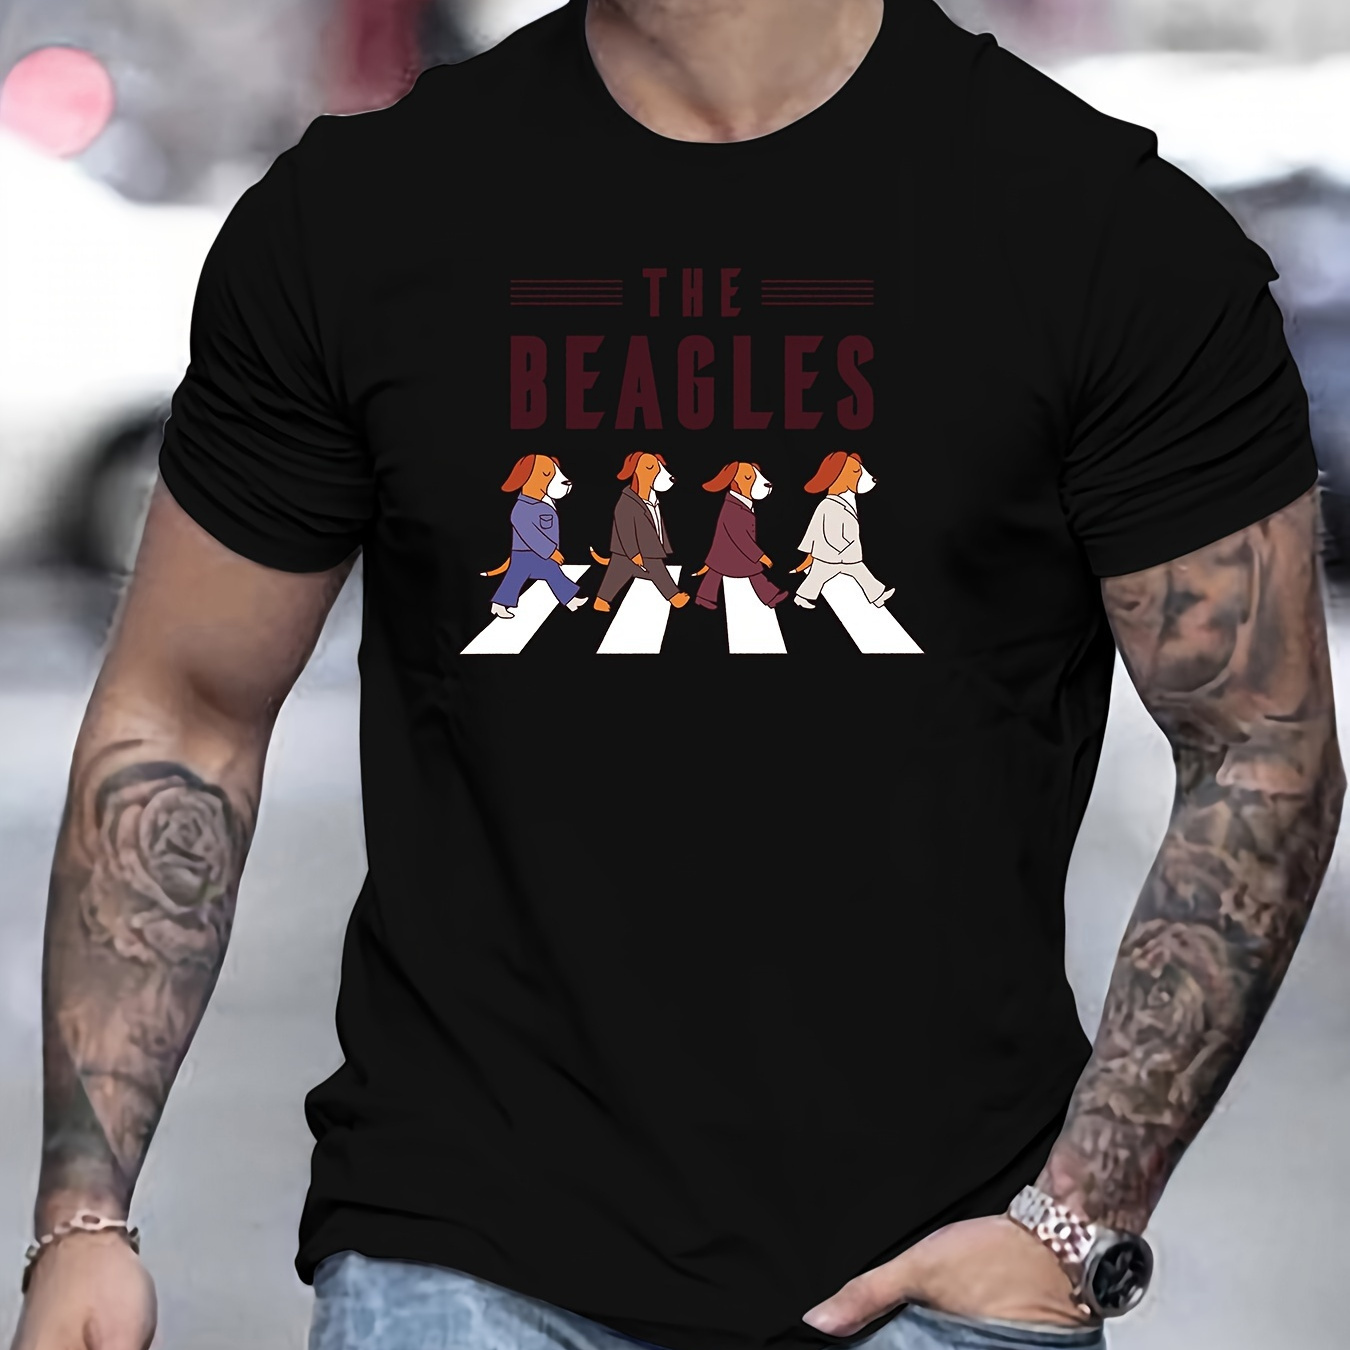 

The Beagles Print Short Sleeve Tees For Men, Casual Crew Neck T-shirt, Comfortable Breathable T-shirt